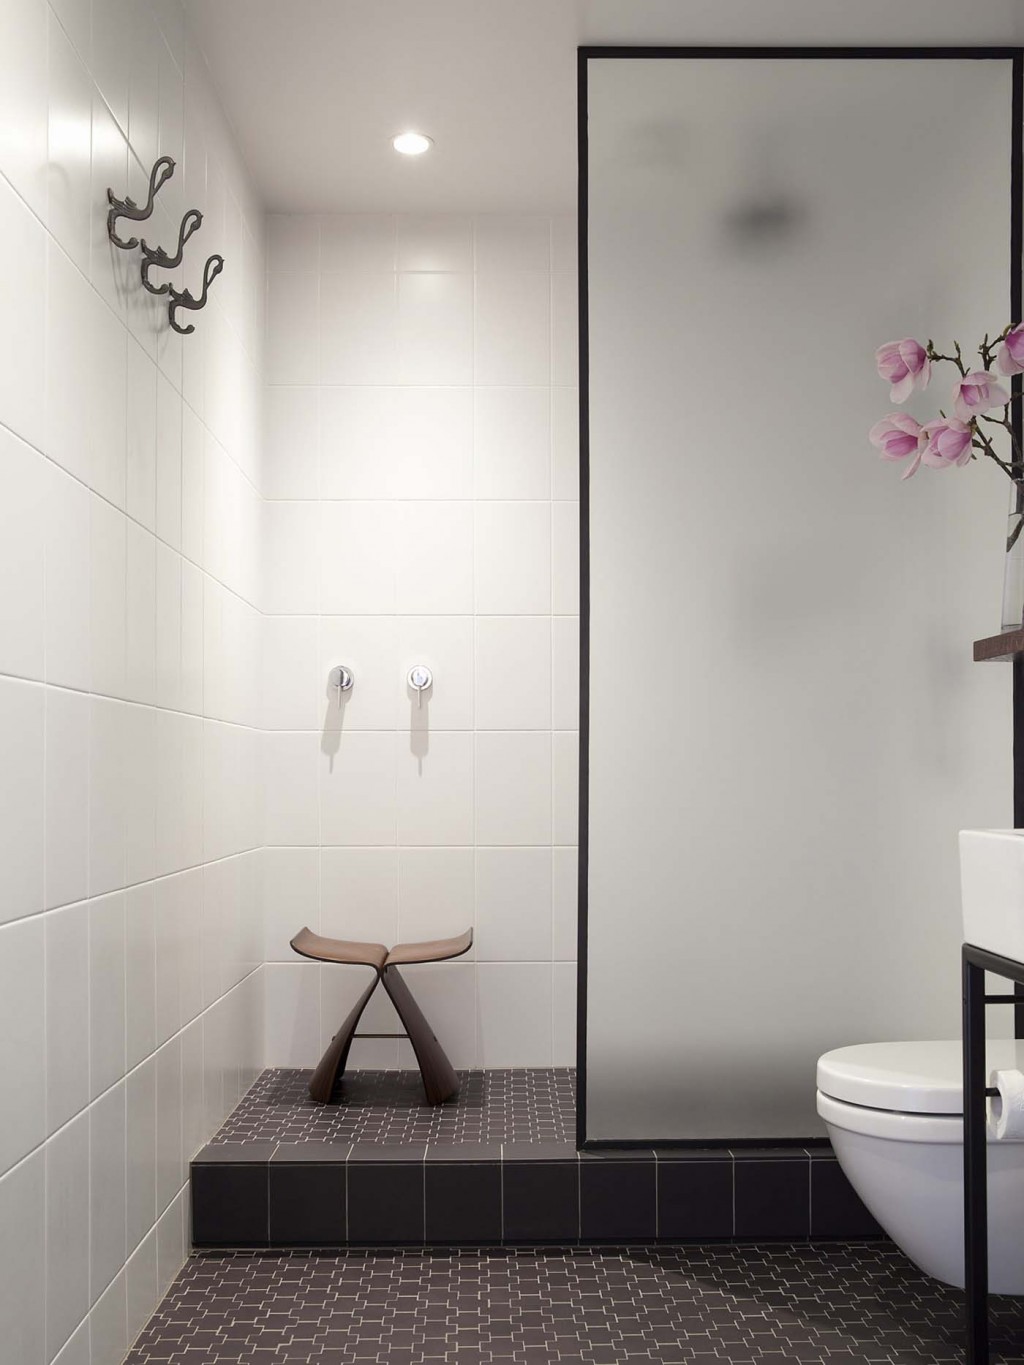 The bathroom - a windowless space in Carroll's small apartment - now features Deco-flavoured floor tiles and a simple shower area. Photograph by David Straight. 